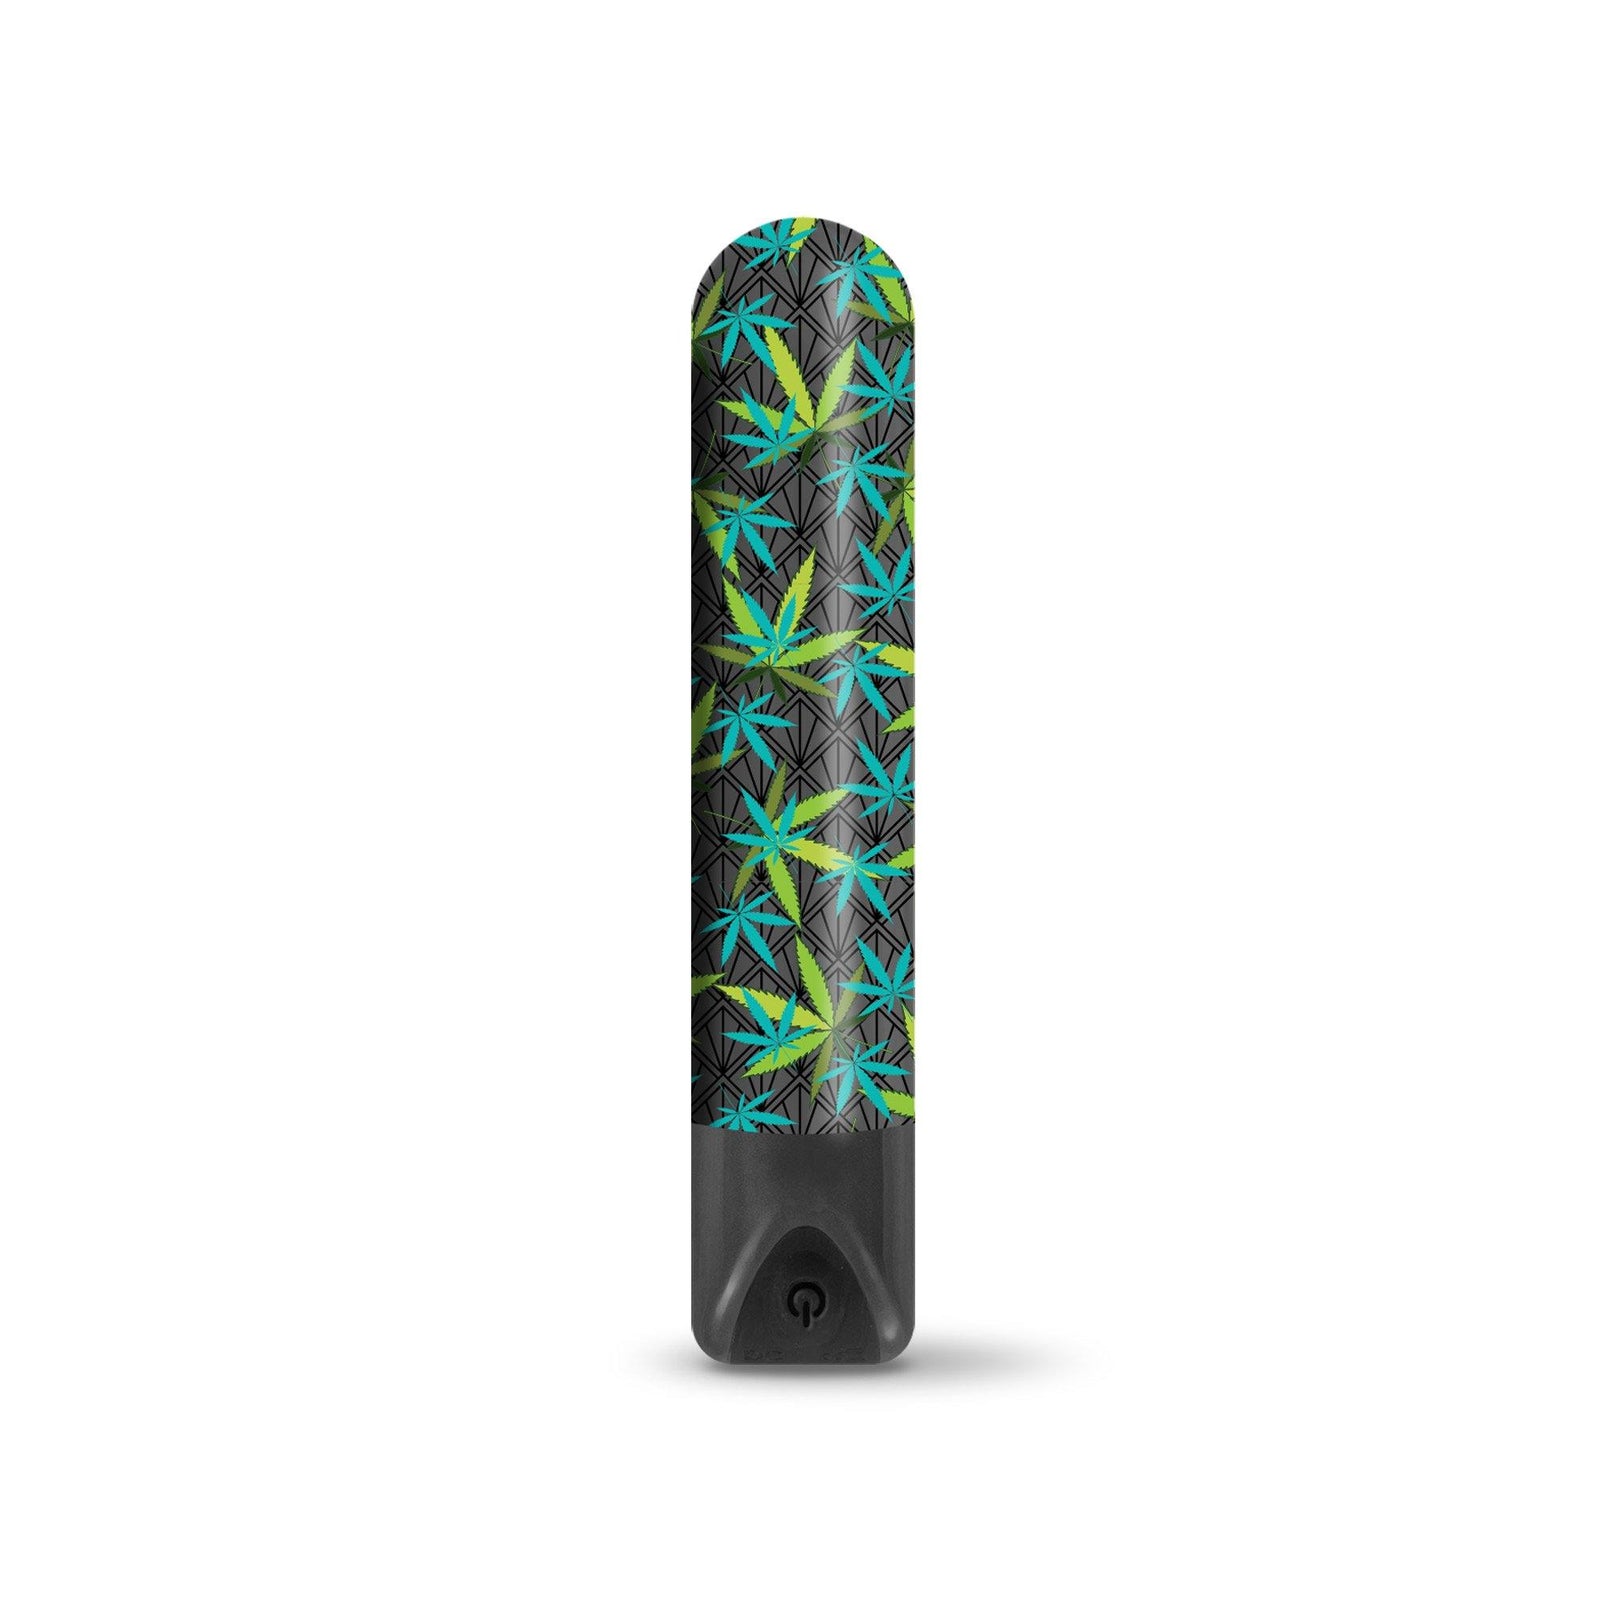 Prints Charming Buzzed Higher Power Rechargeable Bullet, Canna Queen w/storage bag - The Happy Ending Shop